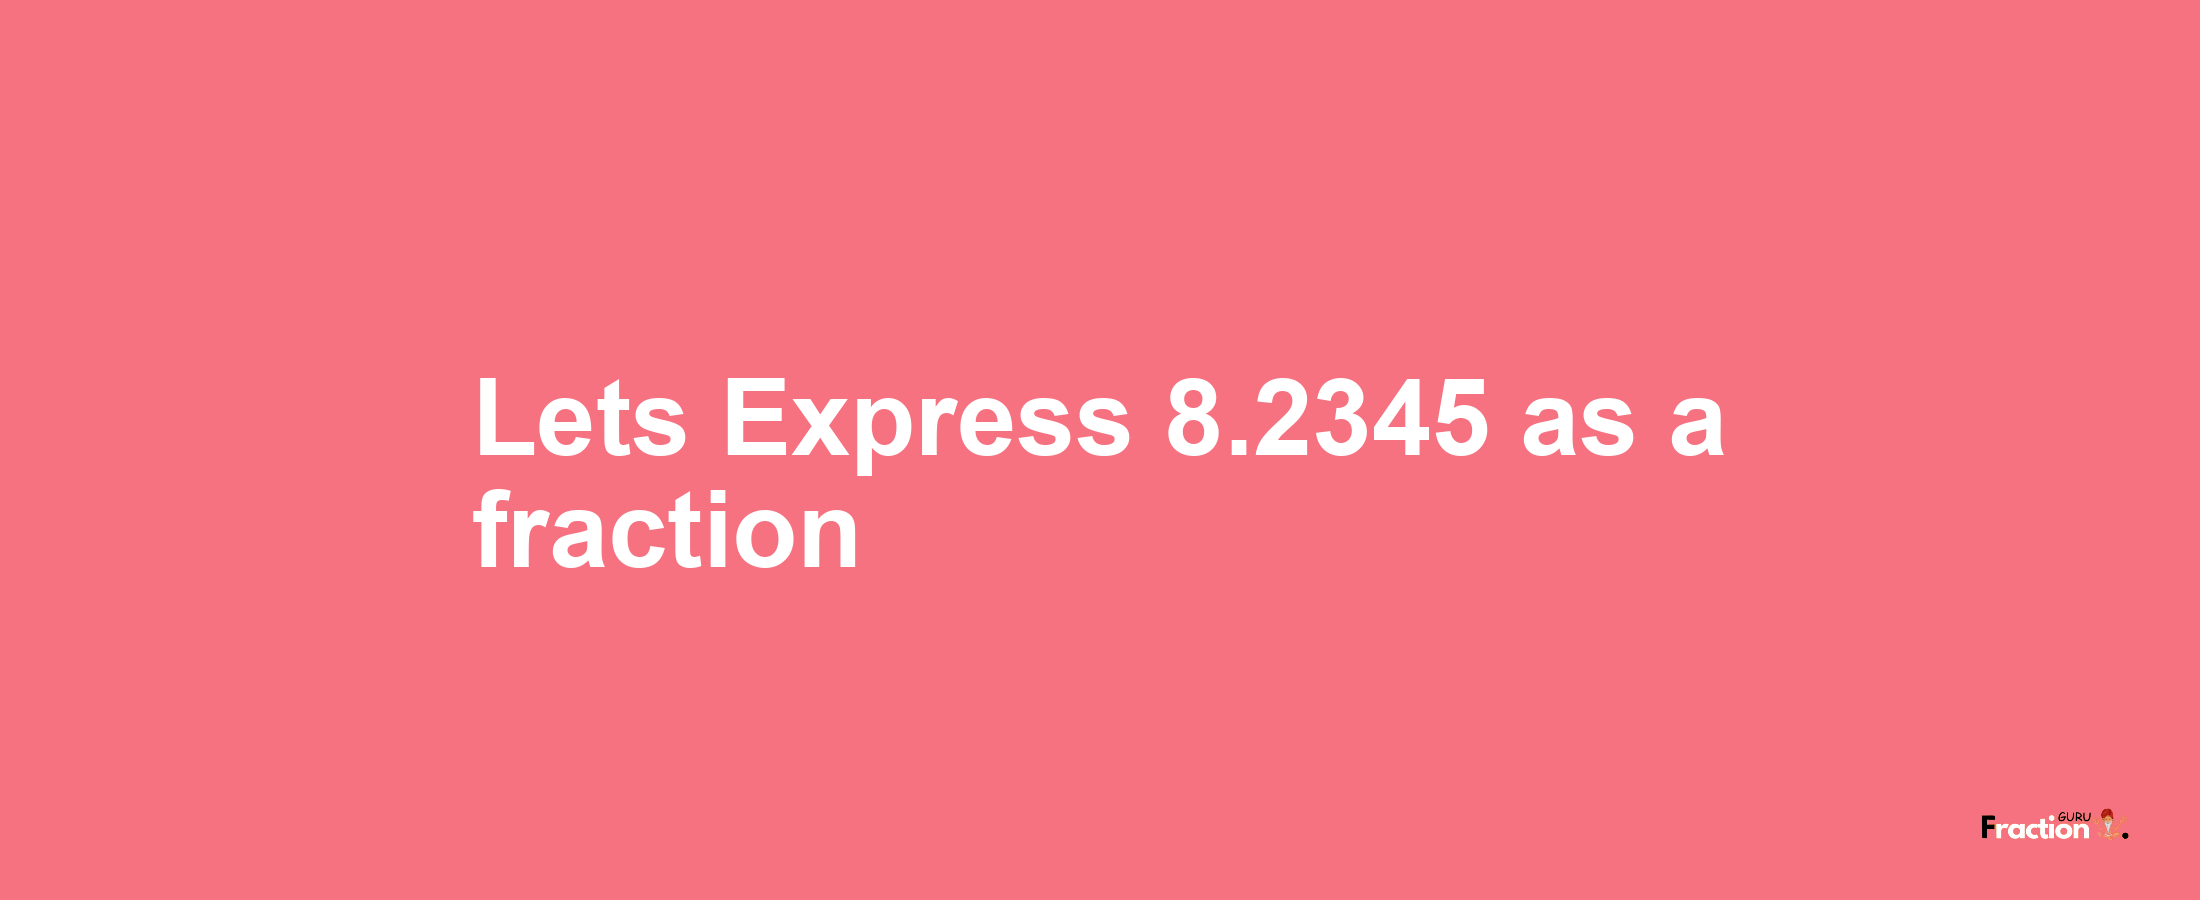 Lets Express 8.2345 as afraction